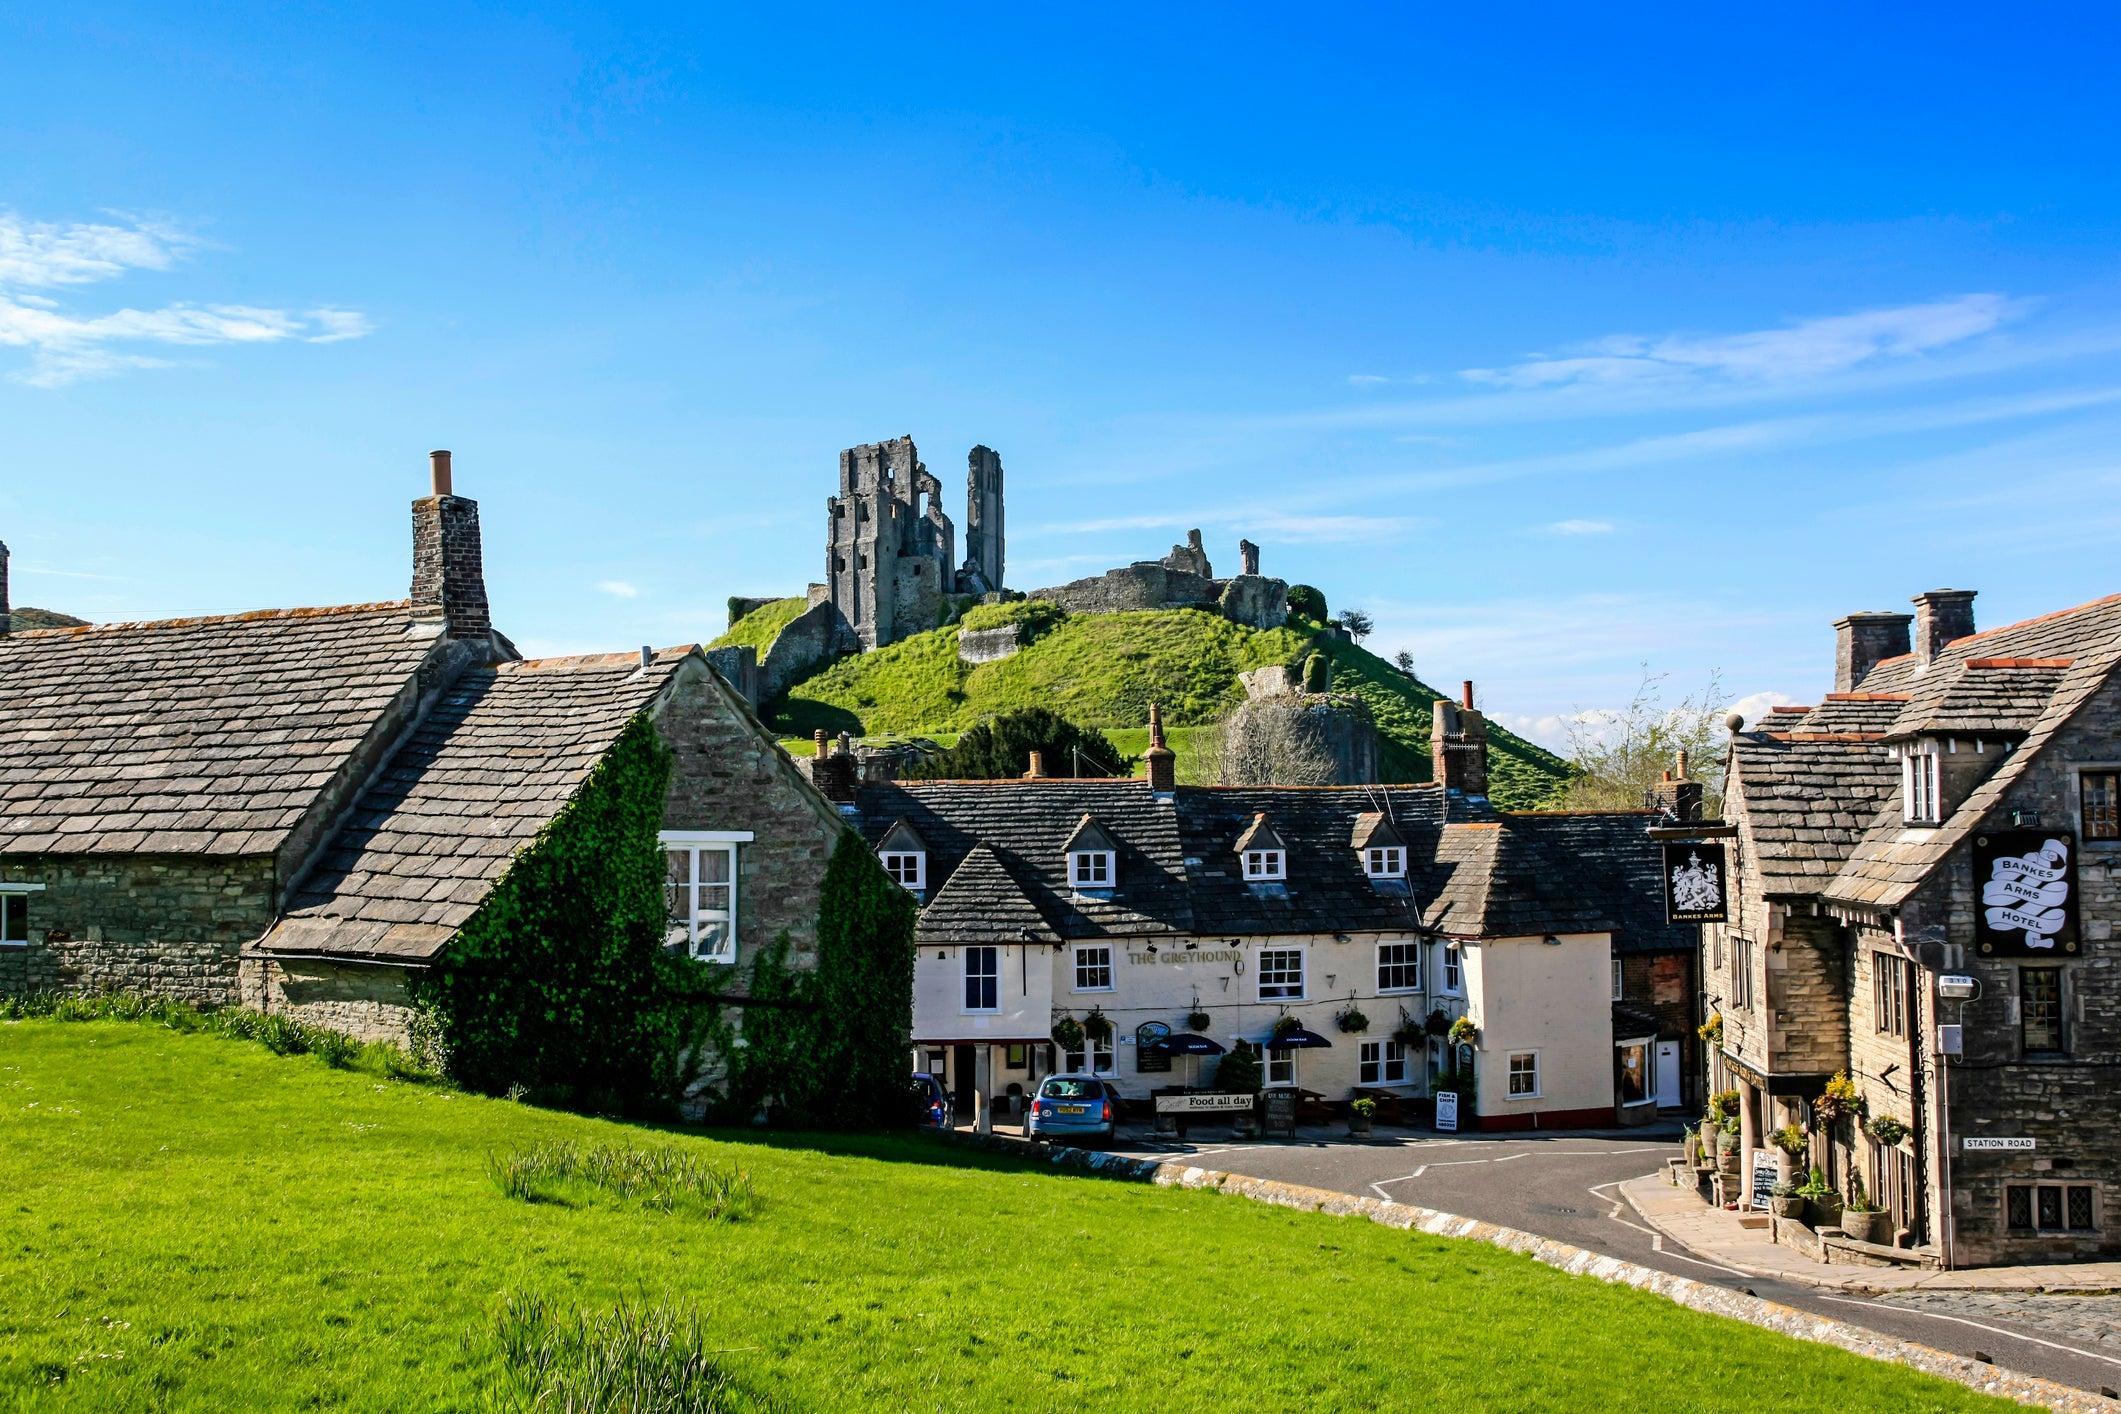 The ruins of Corfe Castle overlook the quintessentially English village of Corfe